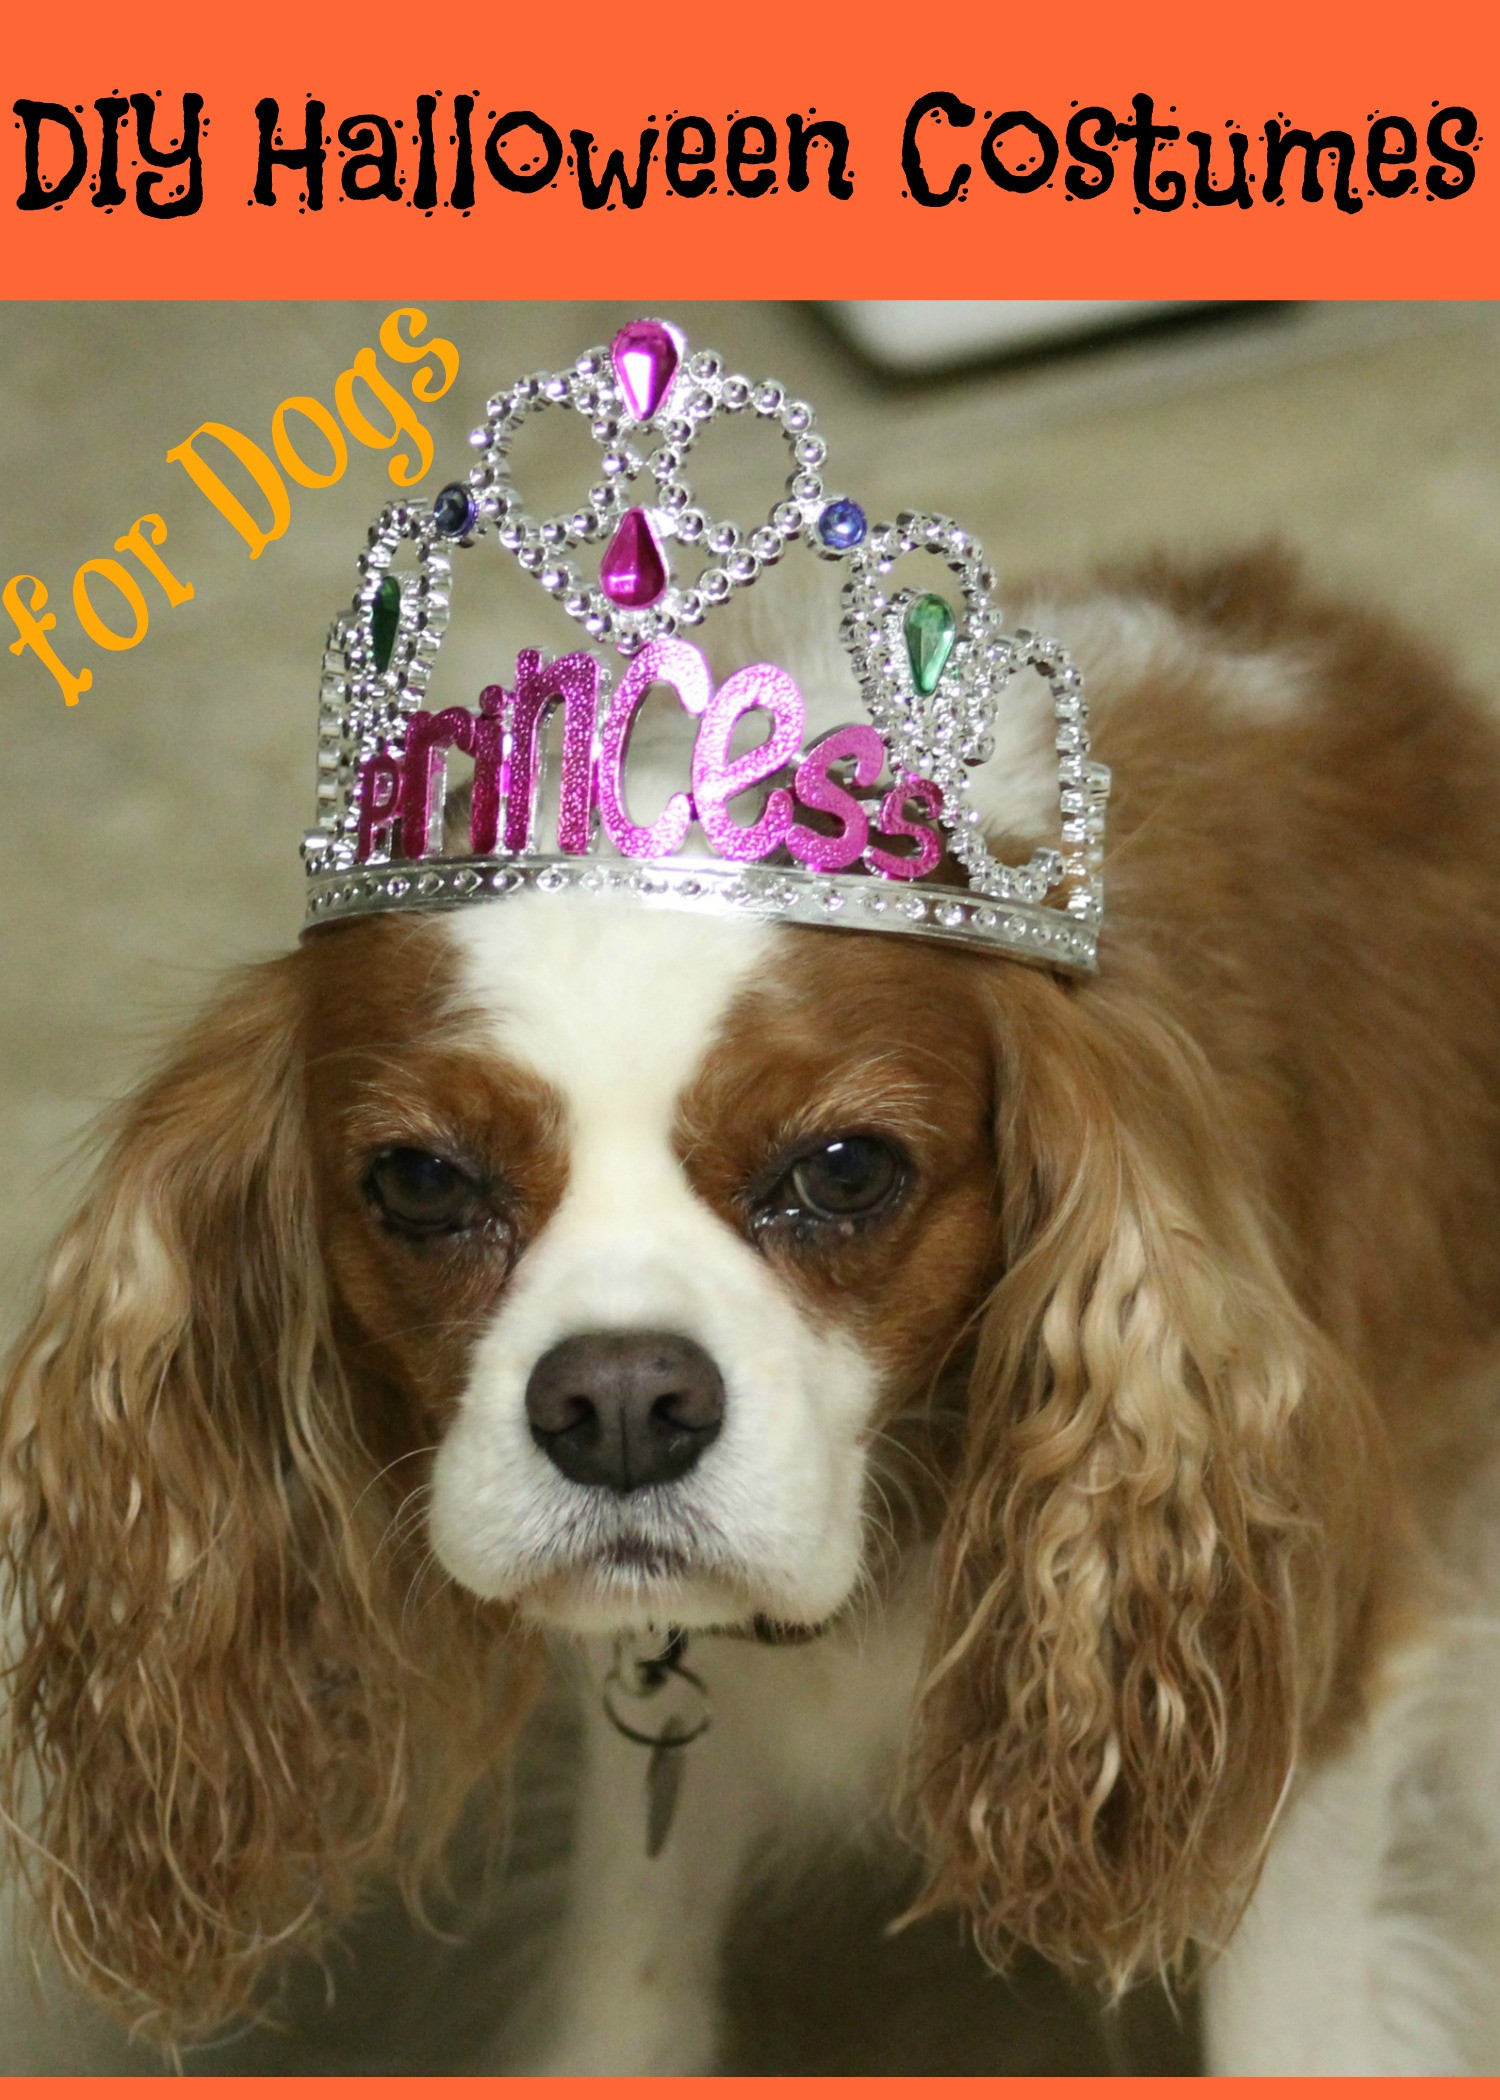 DIY Halloween Costume For Dogs
 5 DIY Halloween Costumes for Dogs